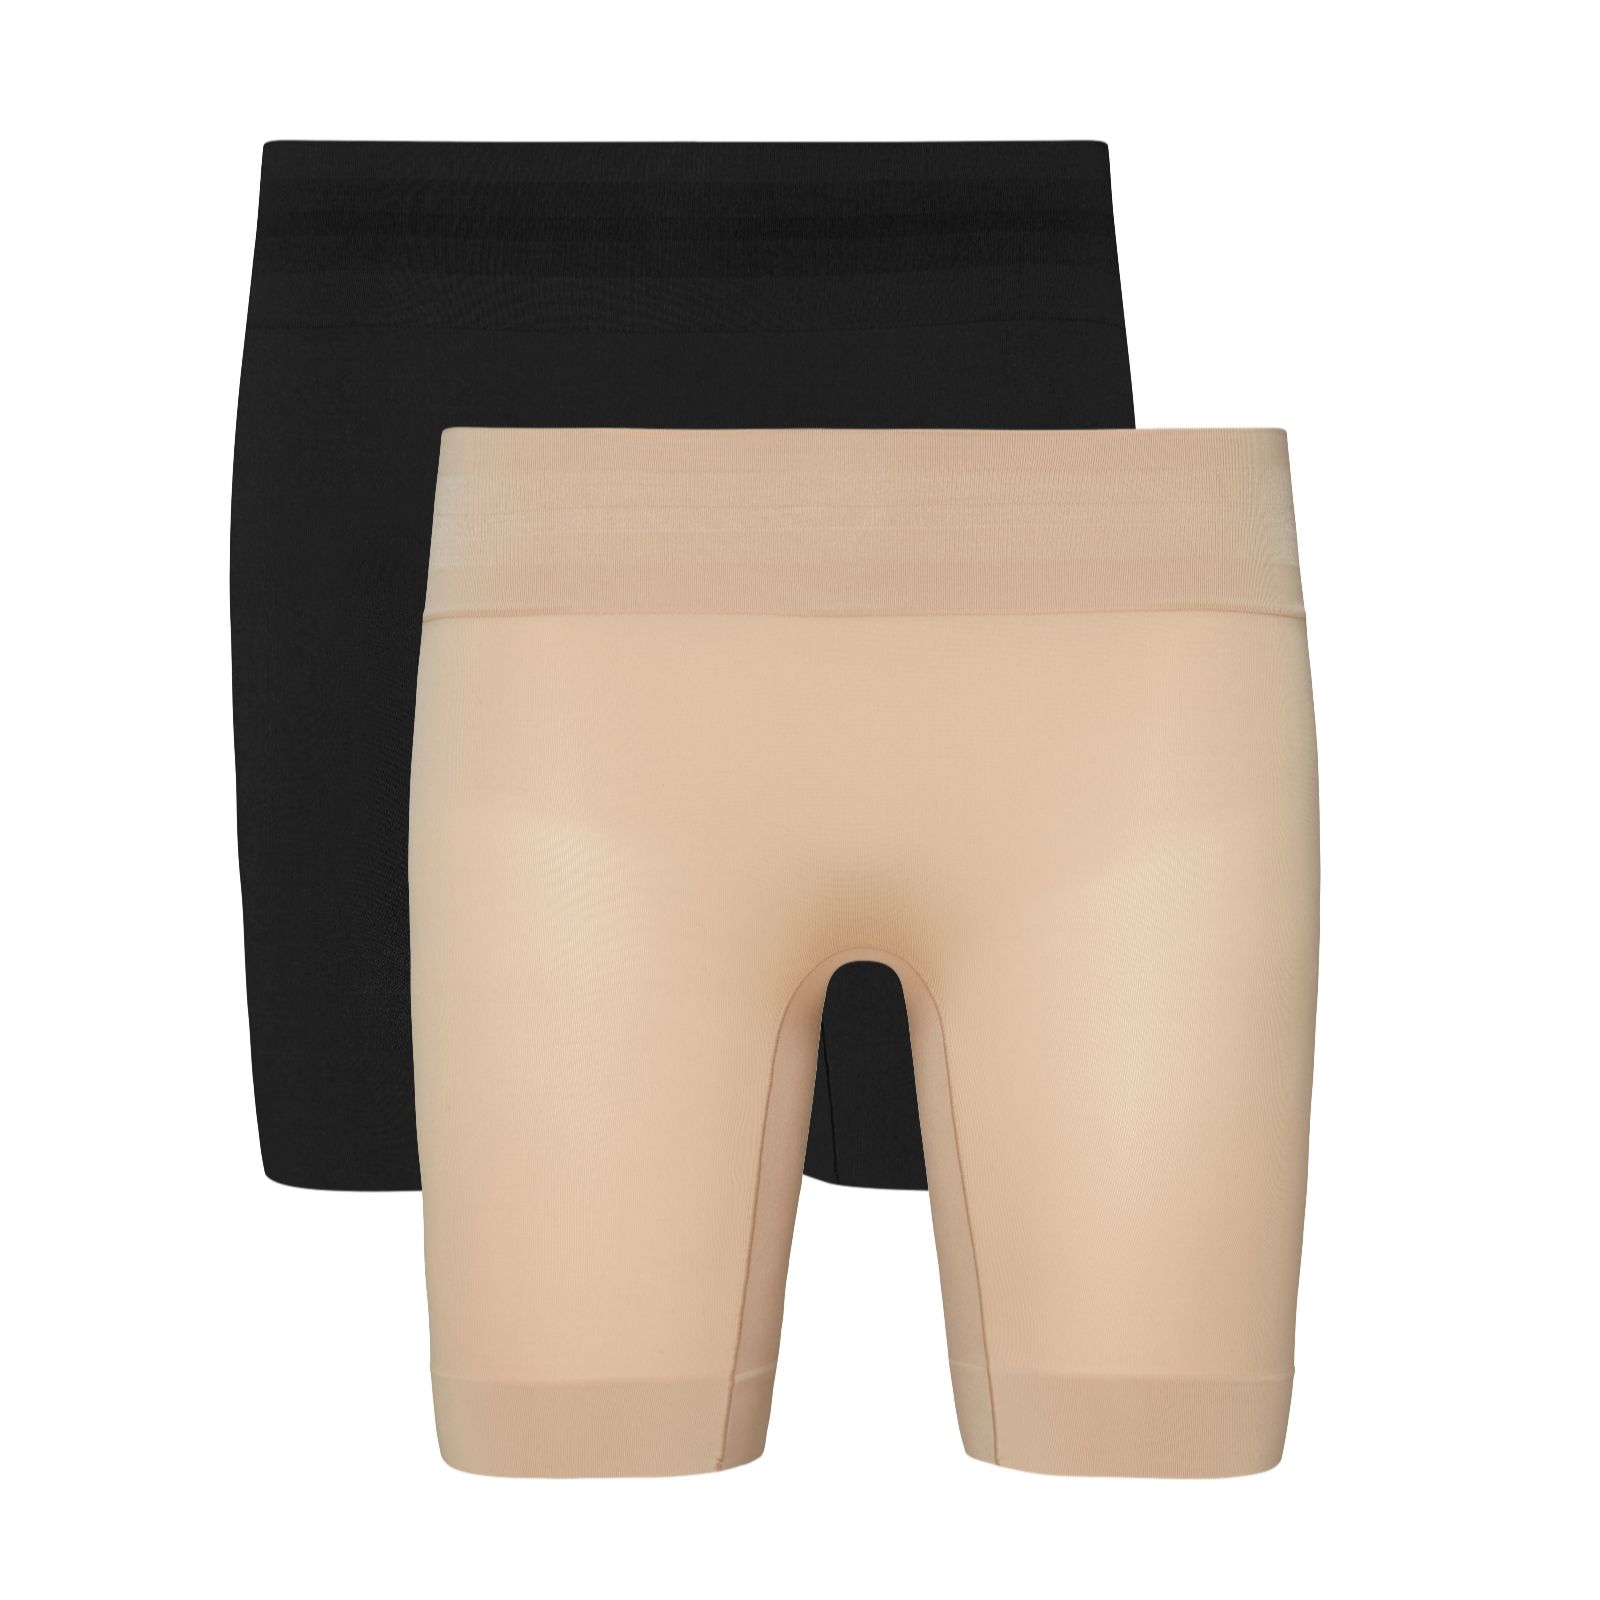 Stay comfortable all day with Jockey Women's Slipshorts